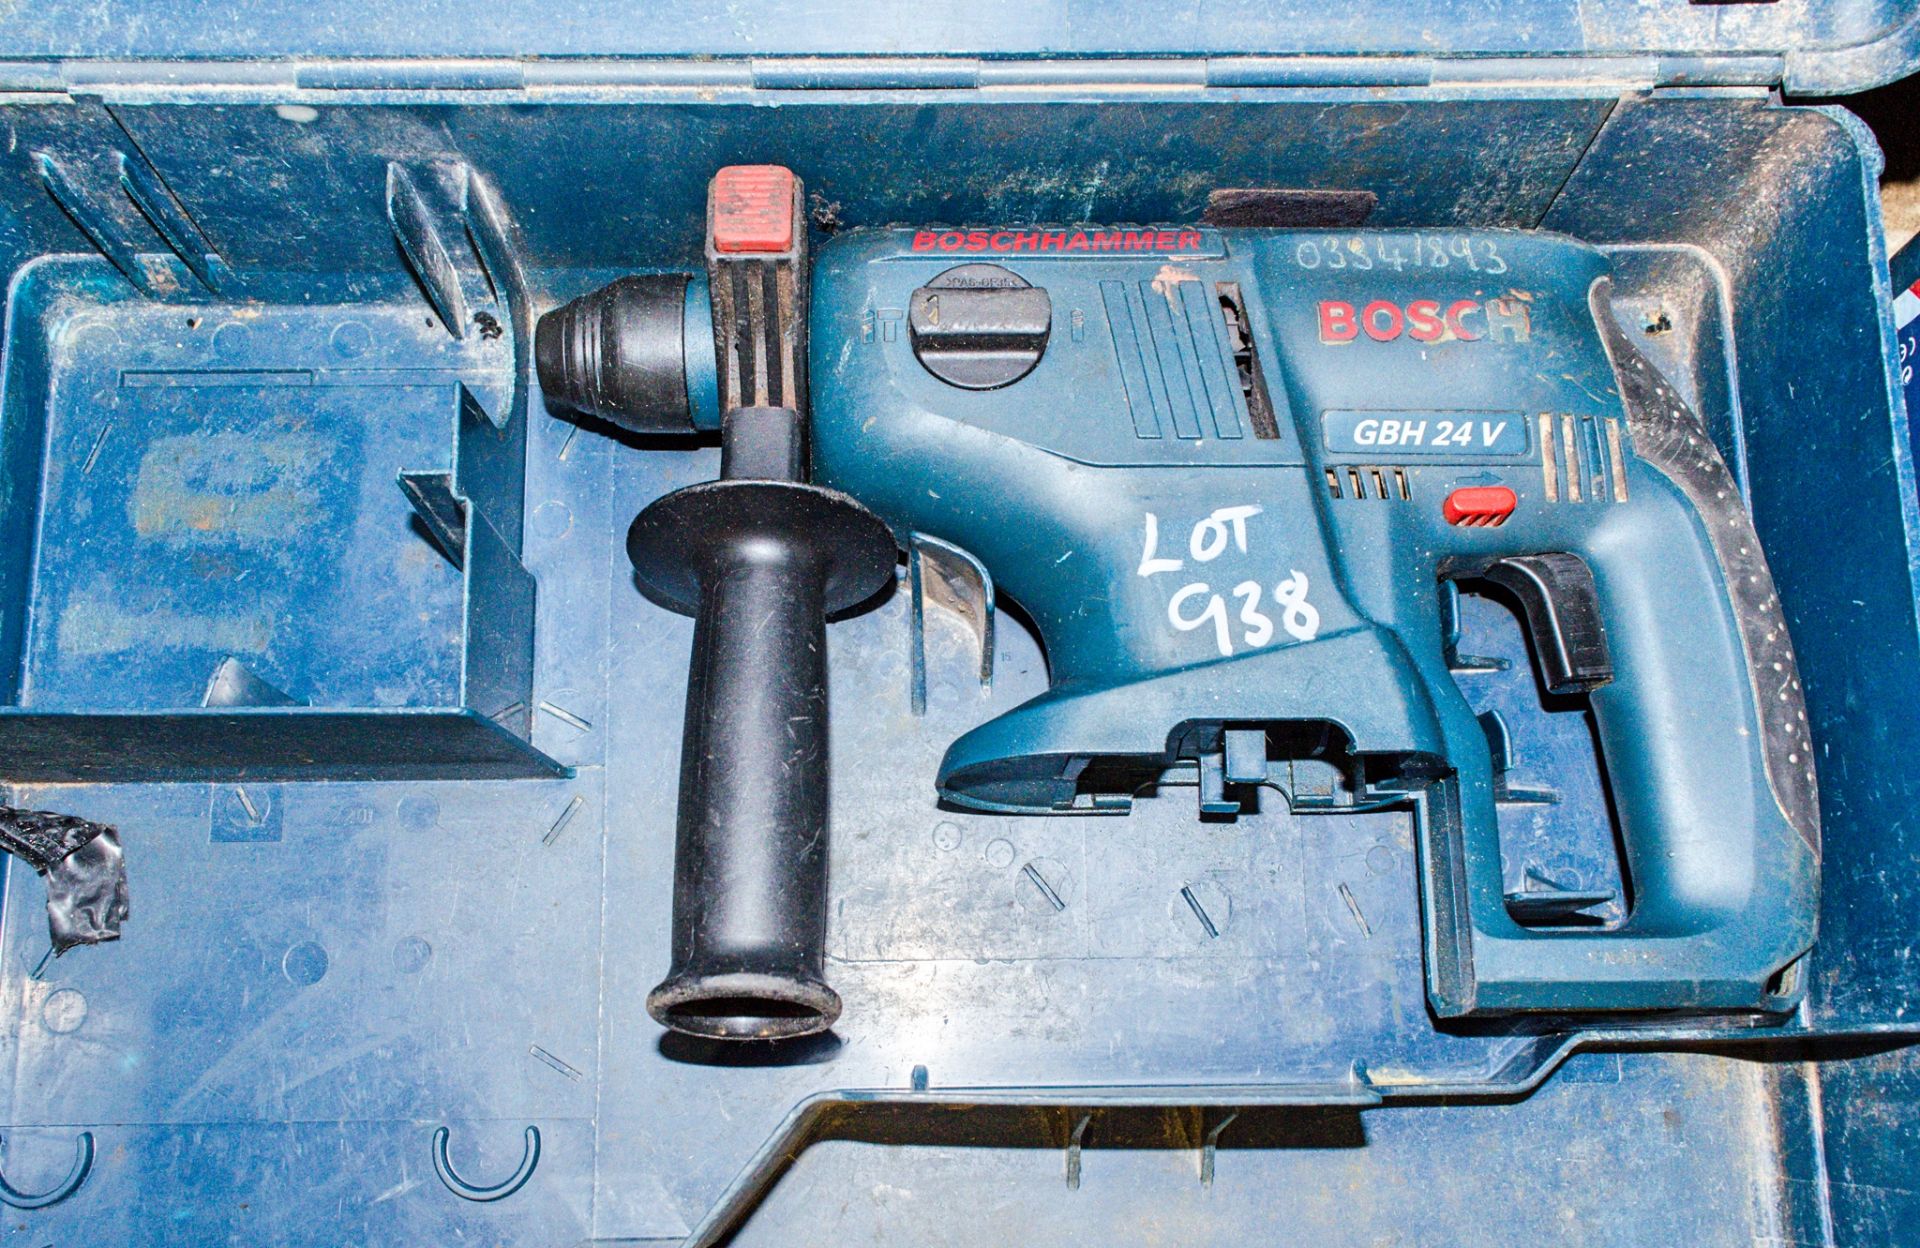 Bosch GBH 24v cordless SDS rotary hammer drill c/w carry case ** No battery or charger **